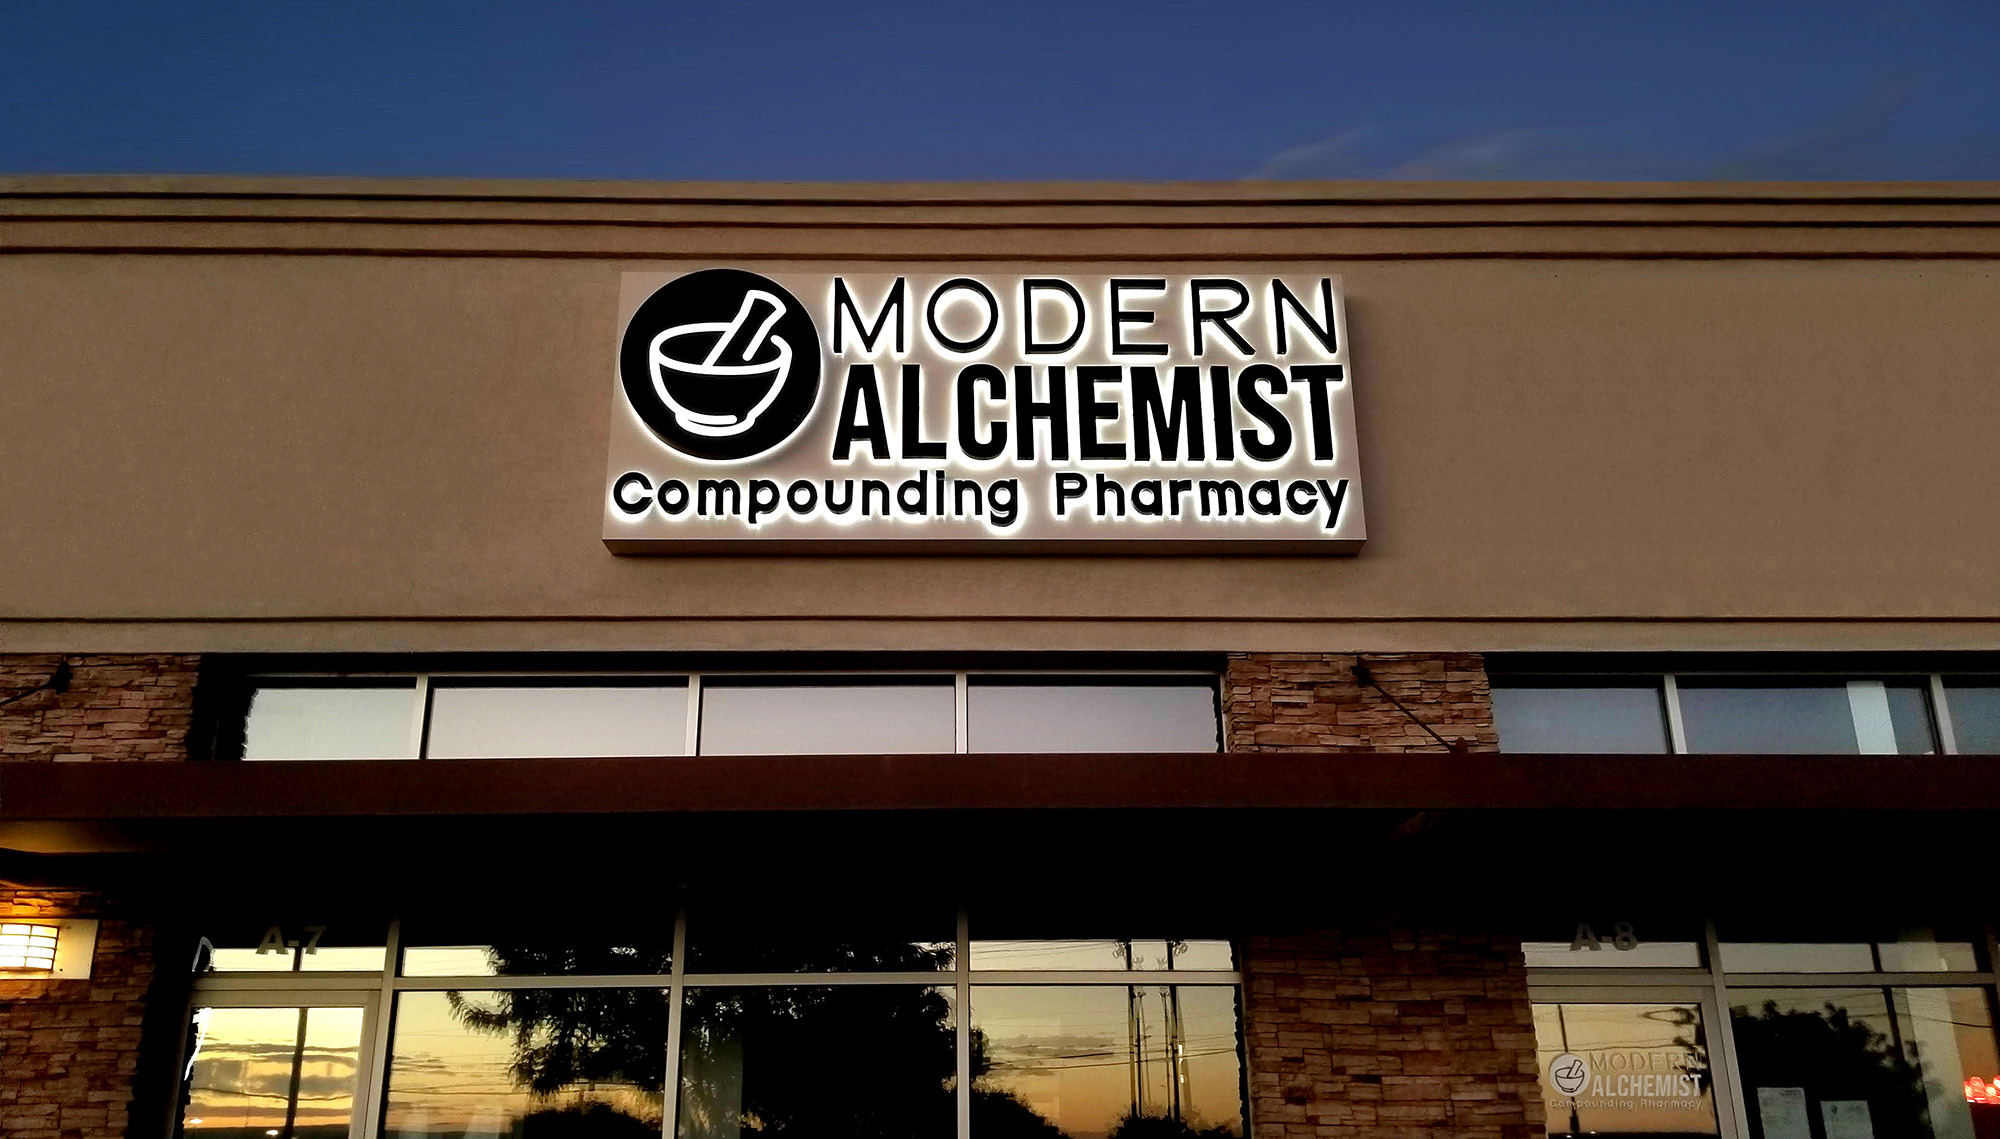 Modern Alchemist opens its first state-of-the-art Compounding Pharmacy in Albuquerque